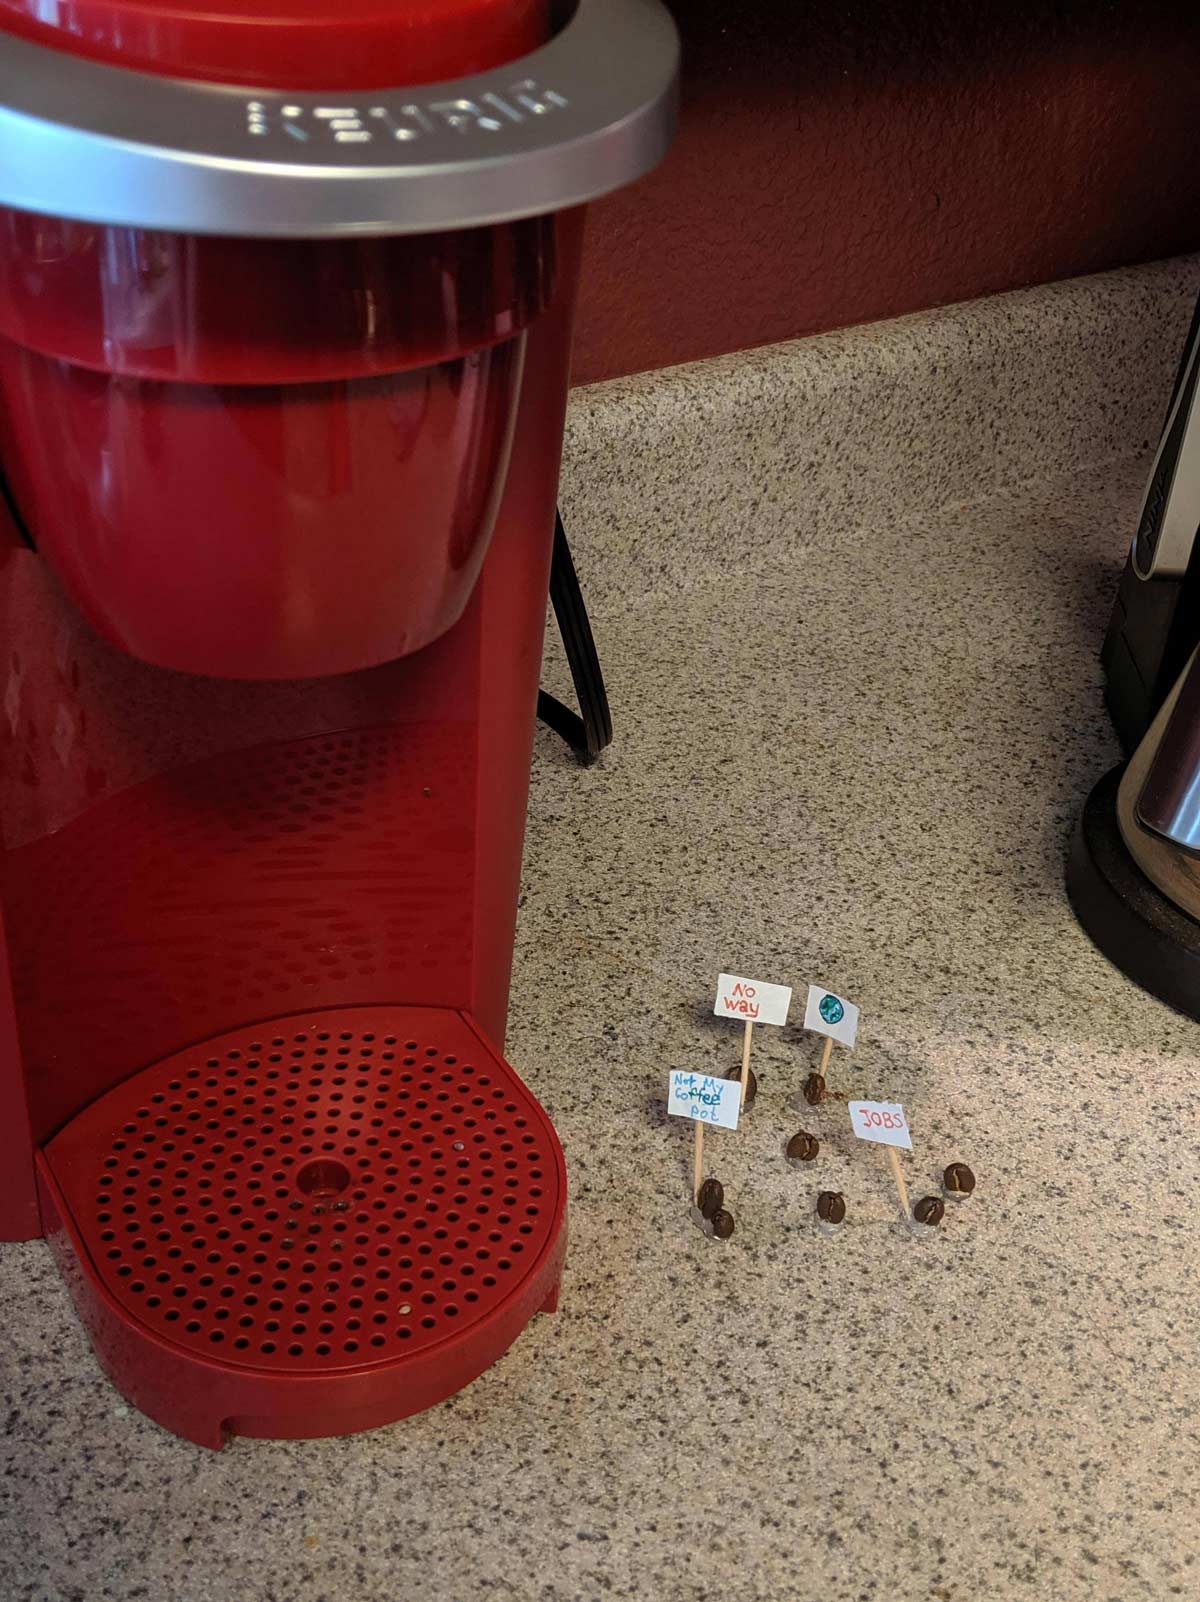 Roomate bought a Keurig despite us already having a coffee pot. The community wasn't happy